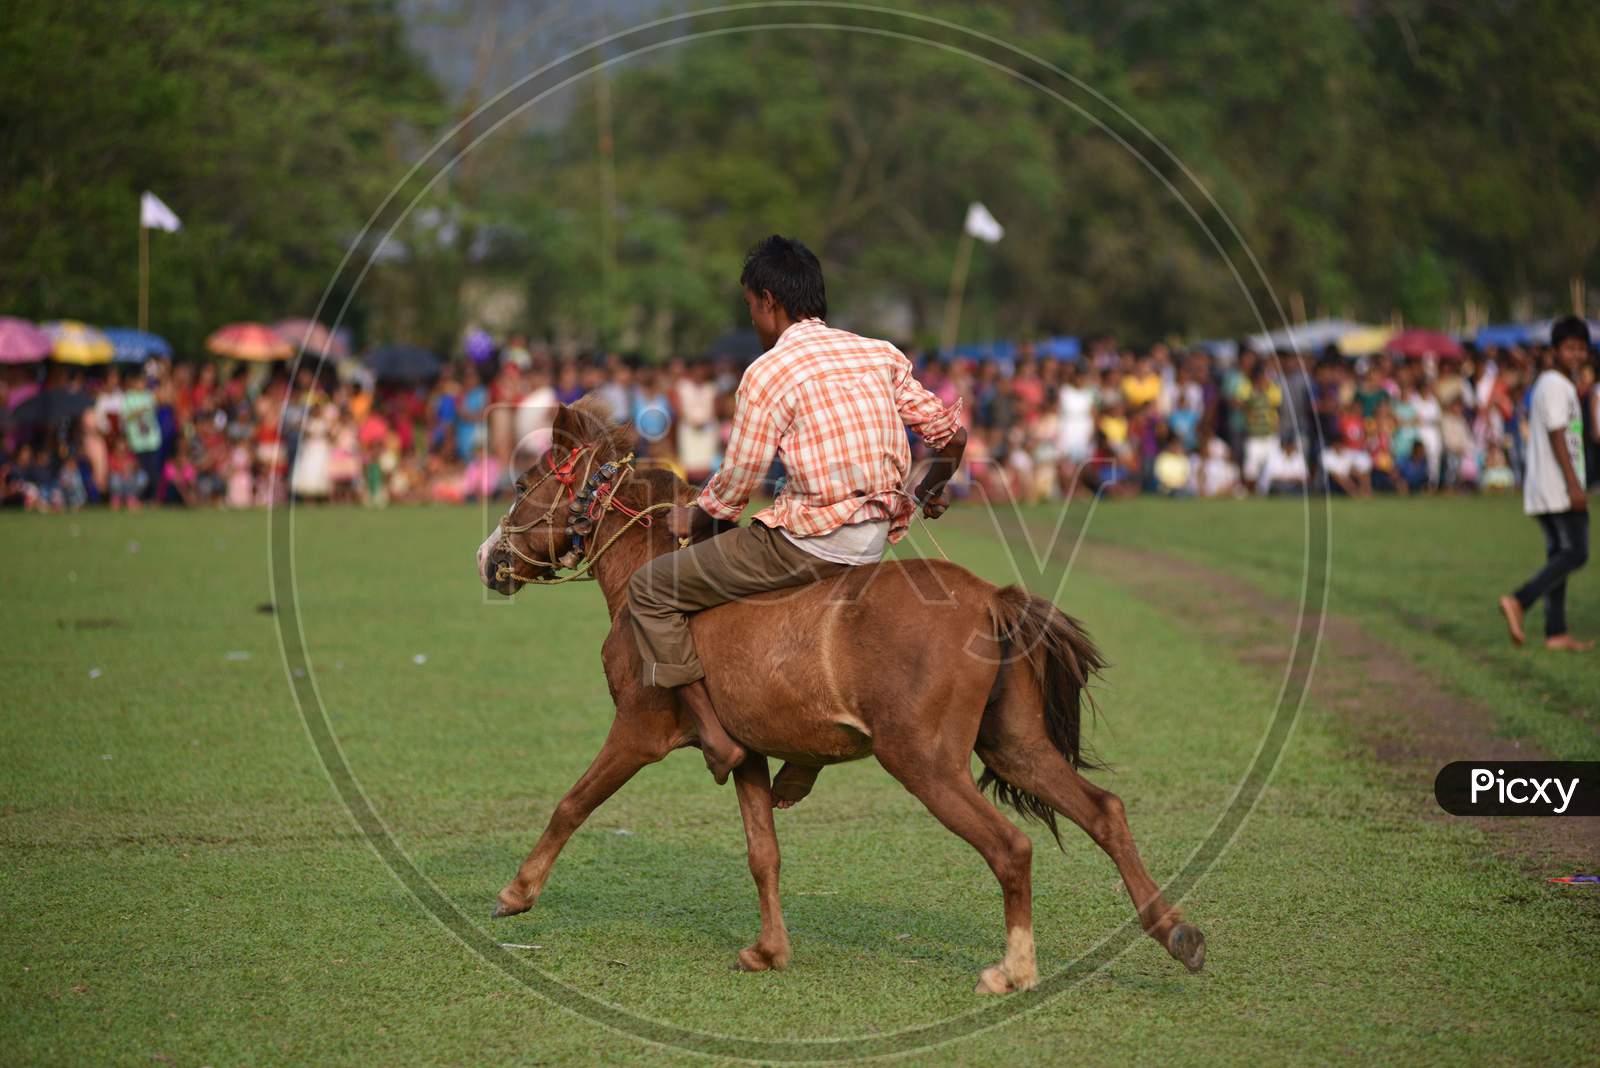 Horse Racing Competition During Suwori Festival Celebrations in Boko, assam